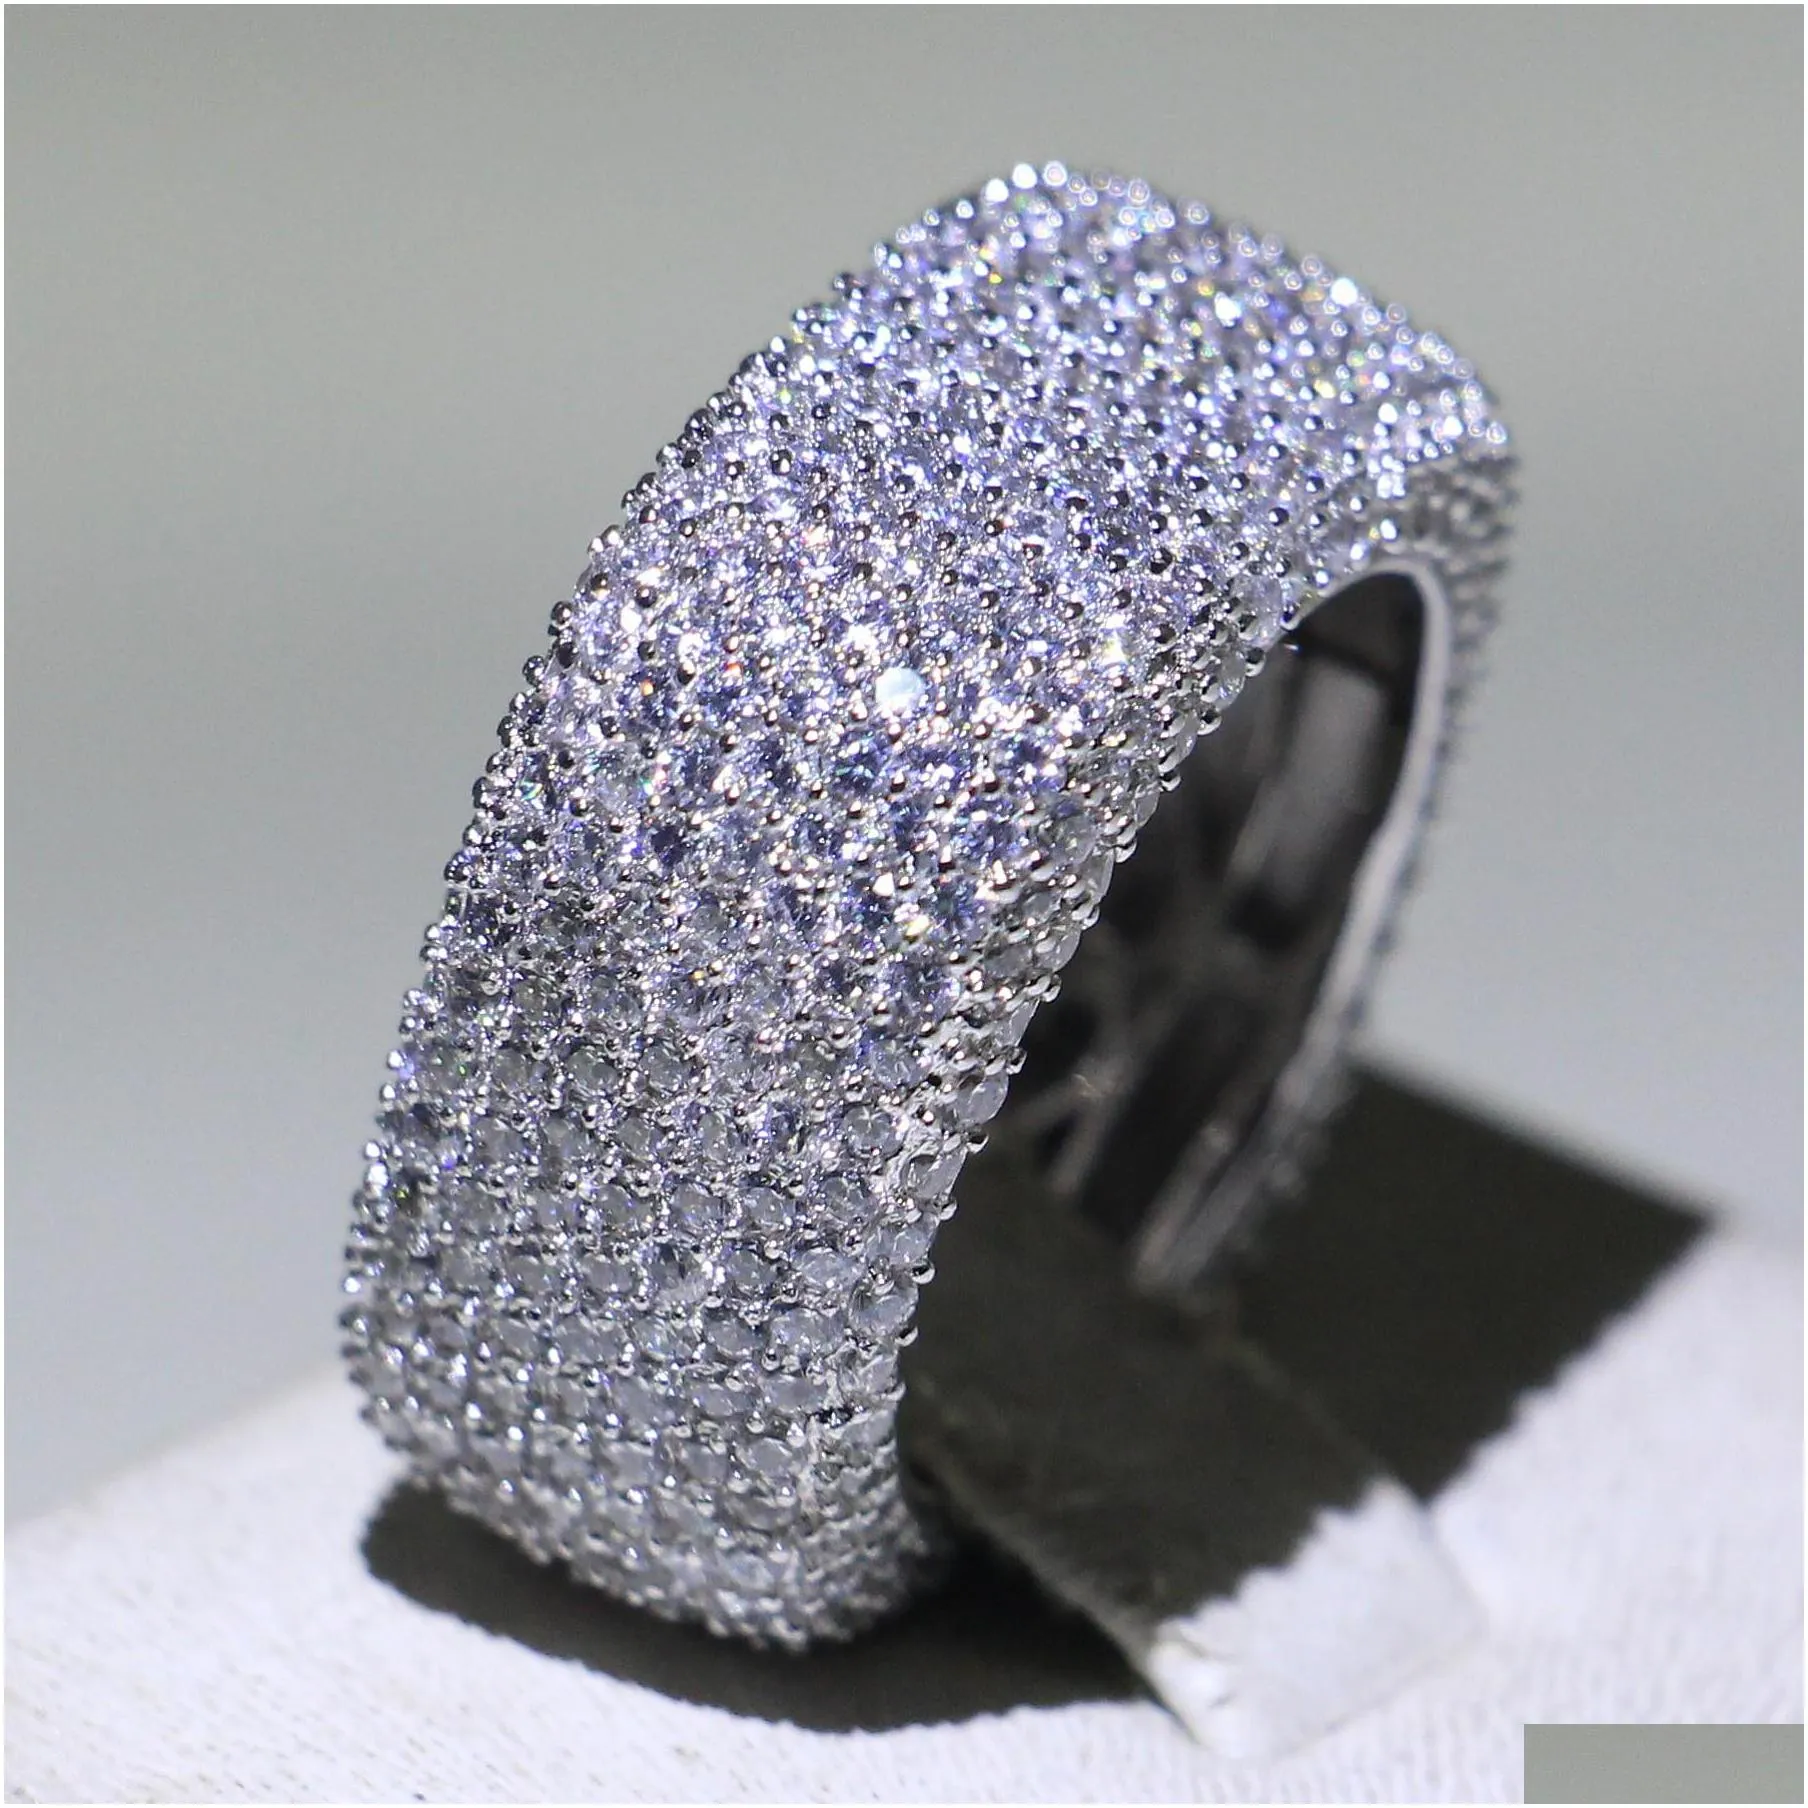 size 510 luxury jewelry 925 sterling silver fill pave mirco full white sapphire cz diamond promise ring wedding women band ring for